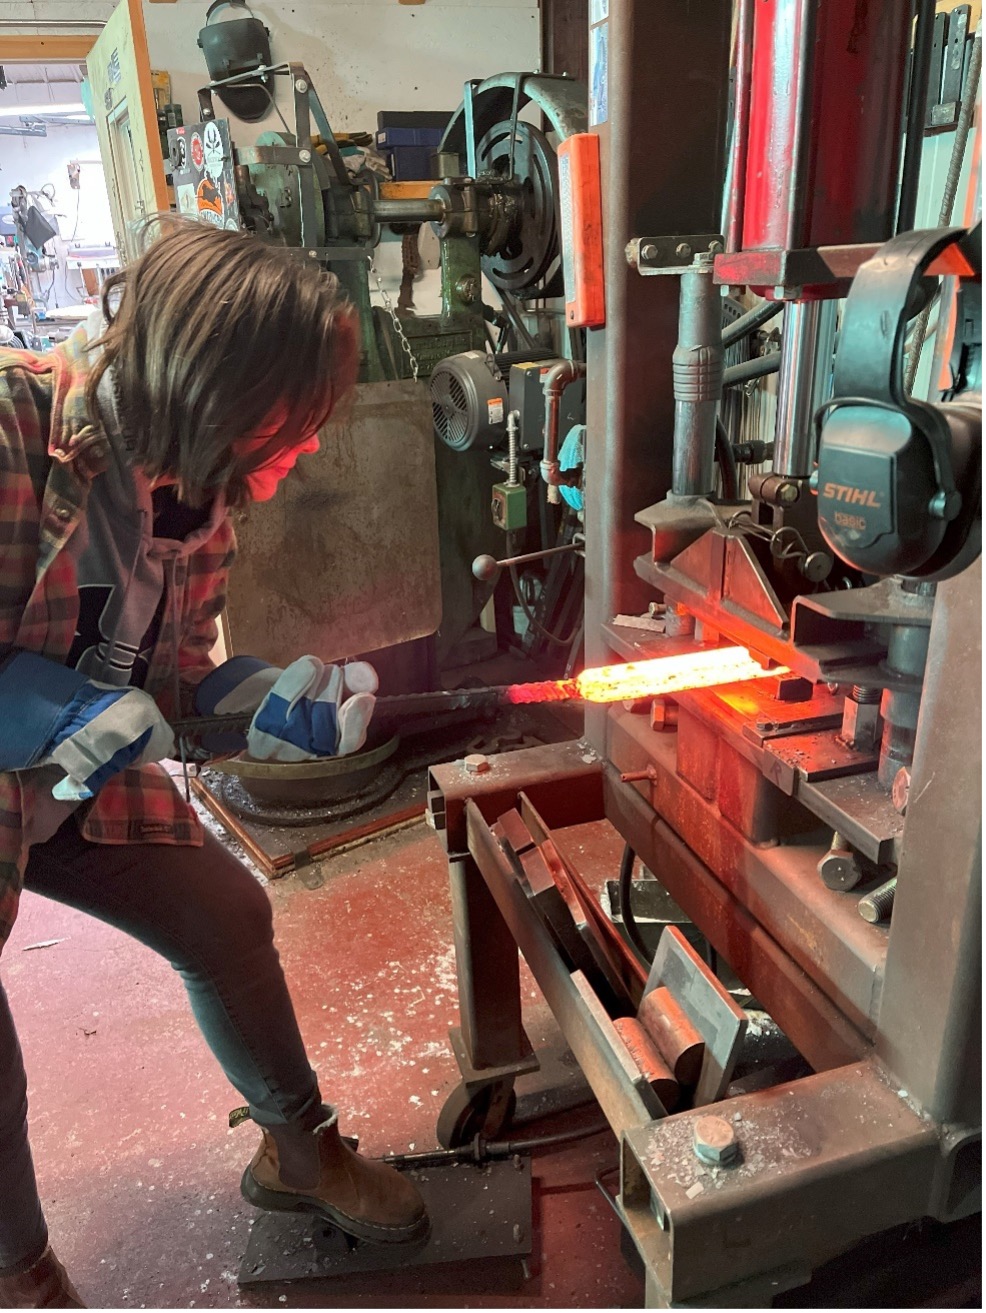 Kira Martin works on the Damascus blade at the Andersen Forge workshop in Watseka, Ill.